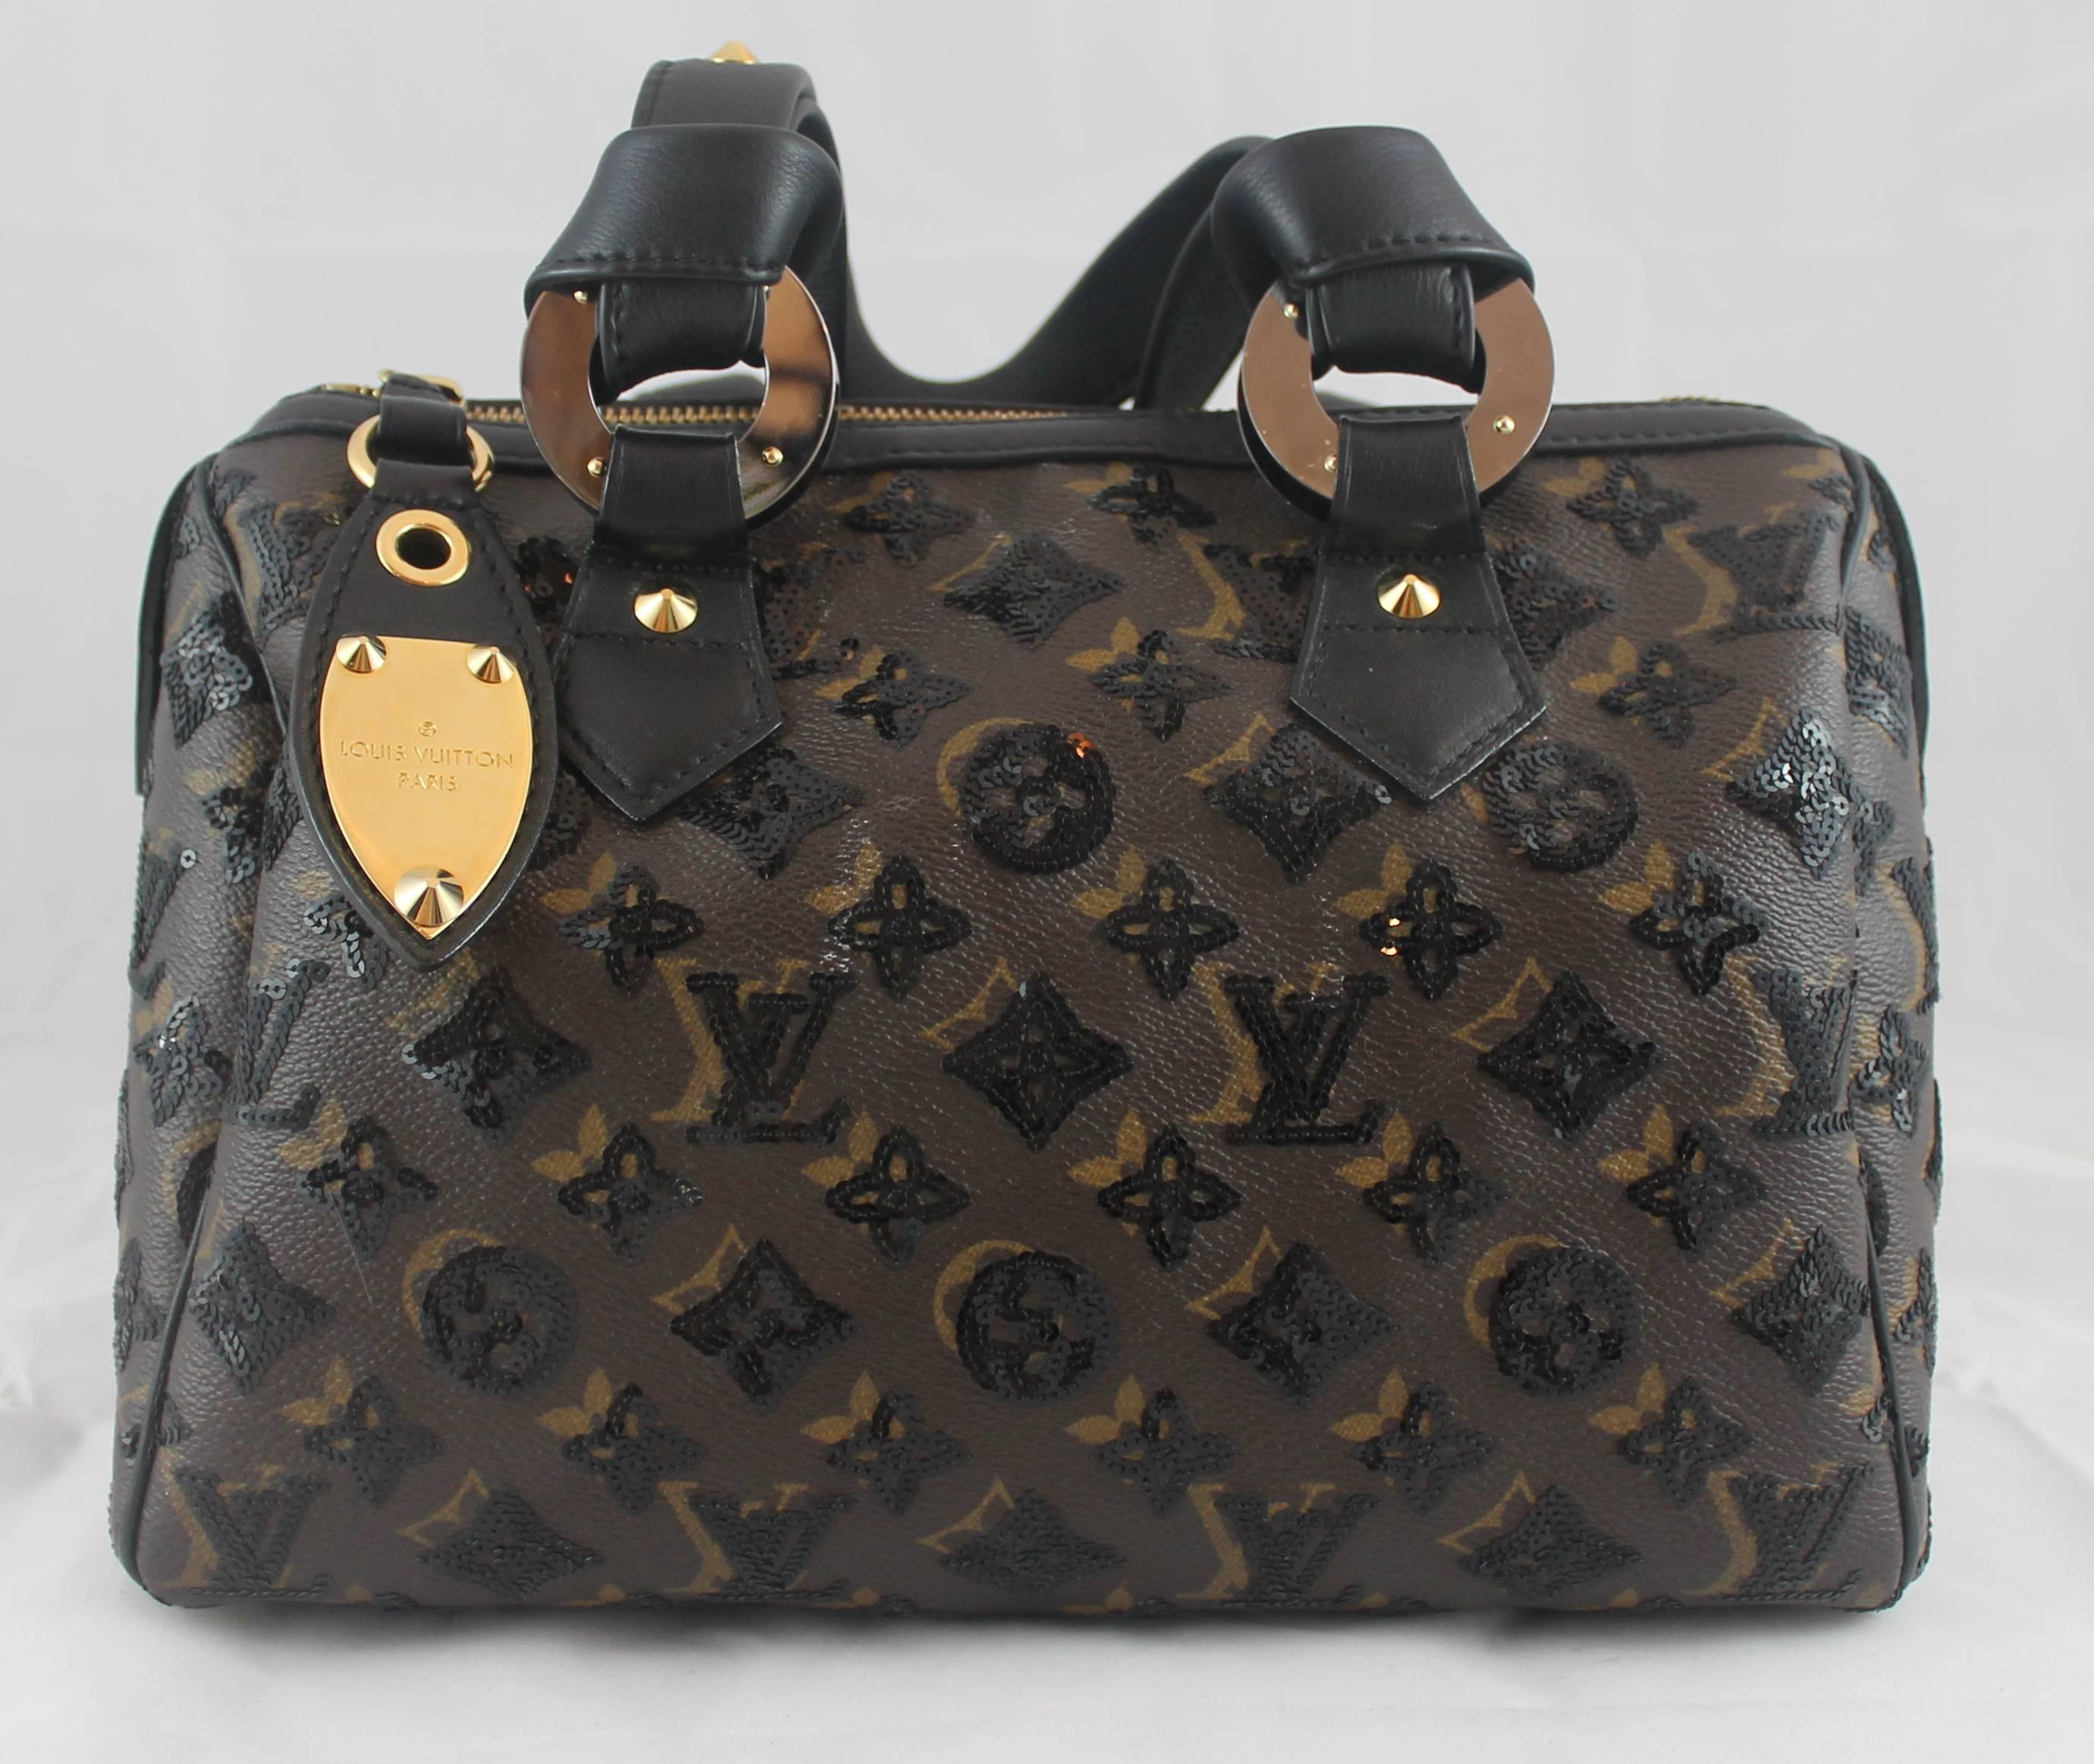 Louis Vuitton Limited Edition Monogram Eclipse Speedy Noir Bag - 2009. This bag is new with tags and comes with a duster. The unique bag features the classic LV monogram print with black sequins, black leather trim, feet on the bottom, a Louis